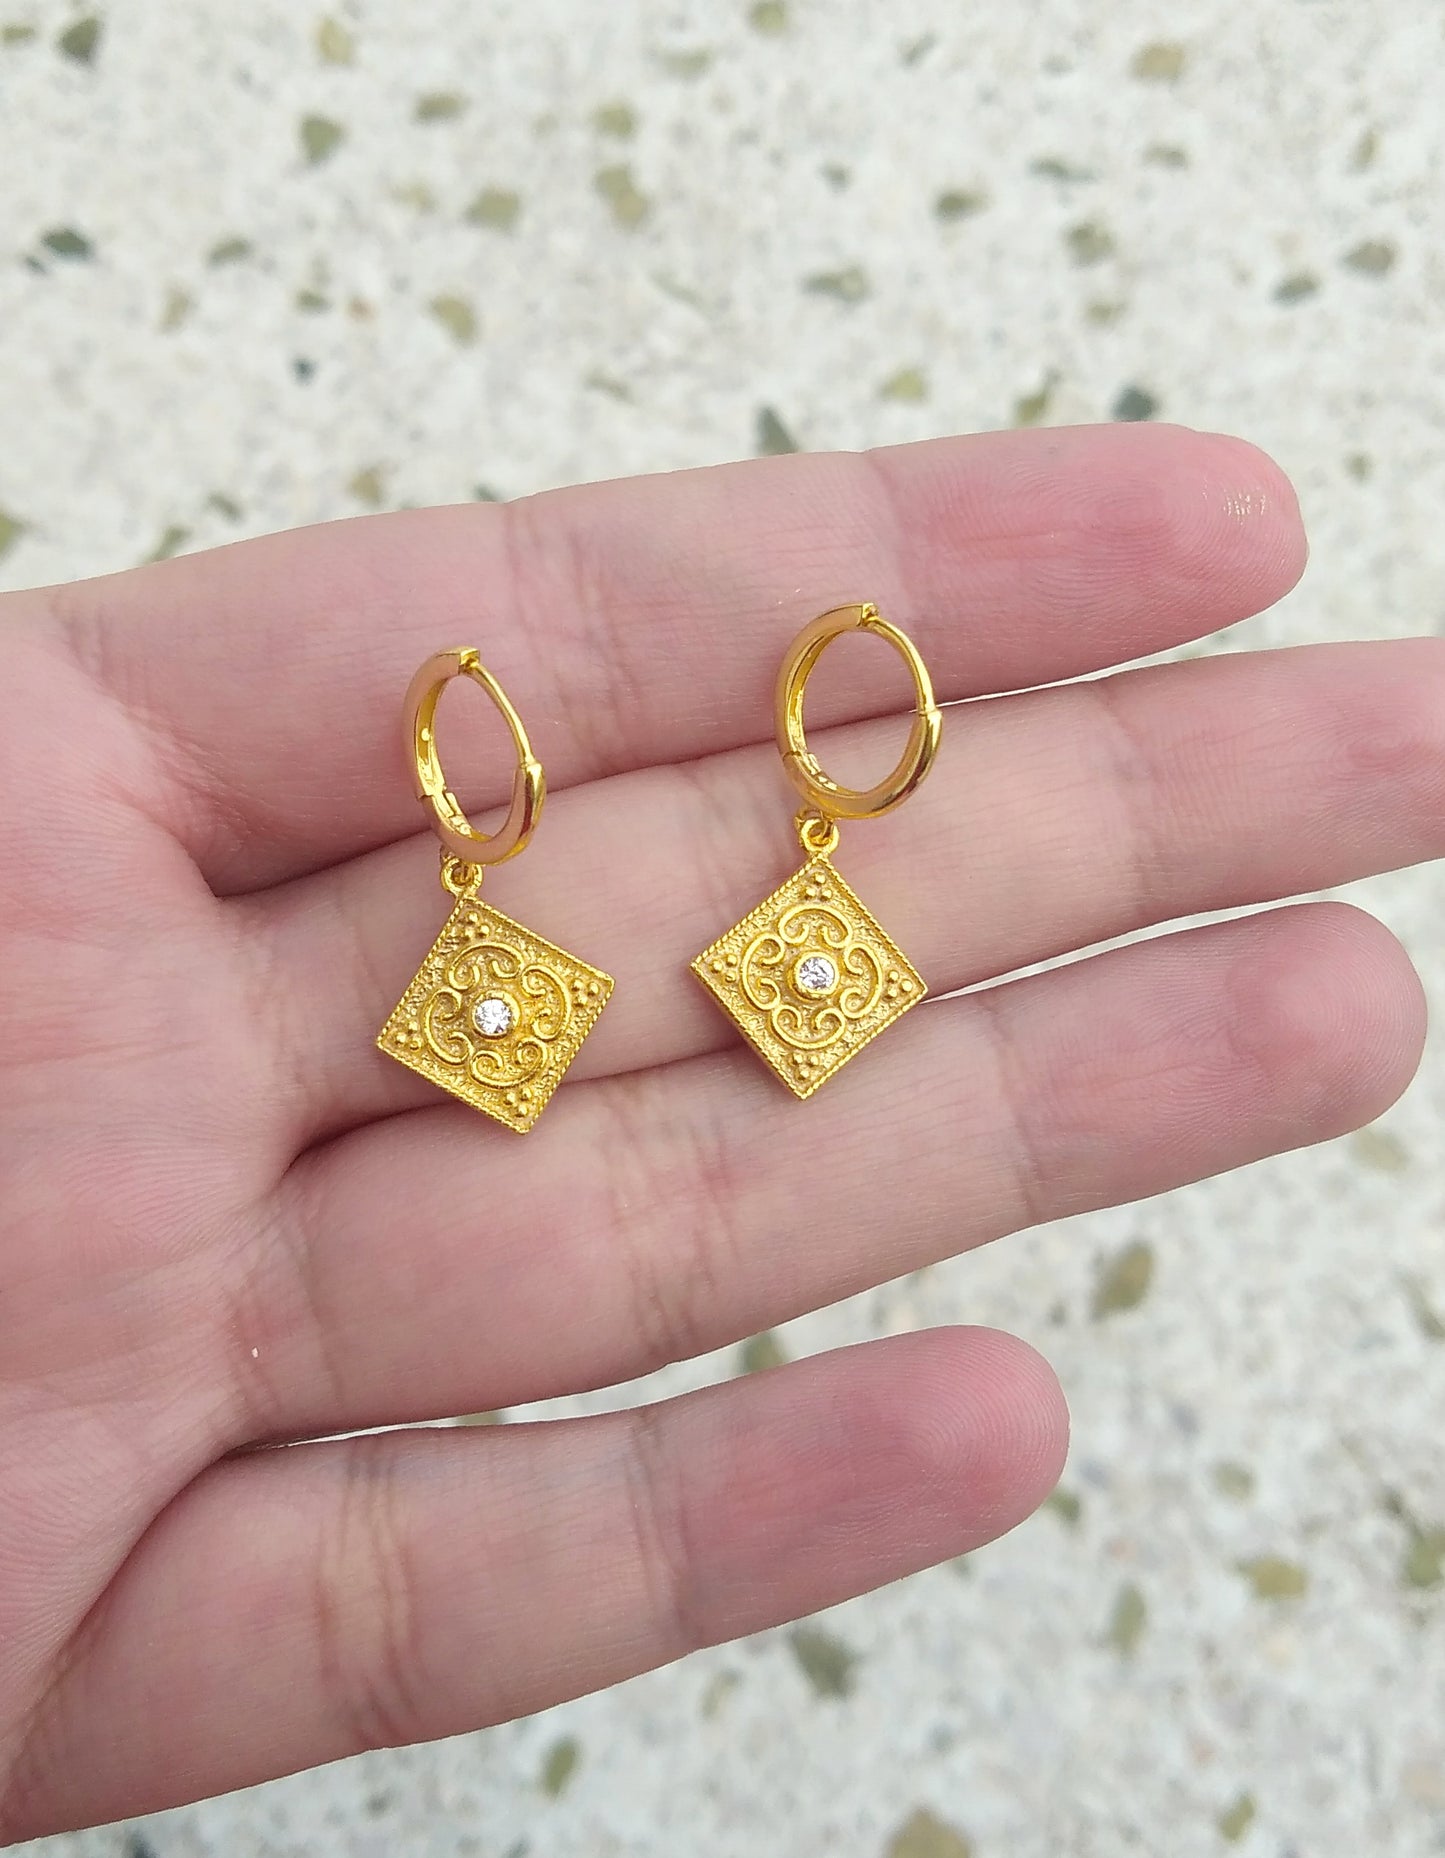 Historical Replica Earrings For Medieval Wedding, Gold Huggie Earrings With Zircon